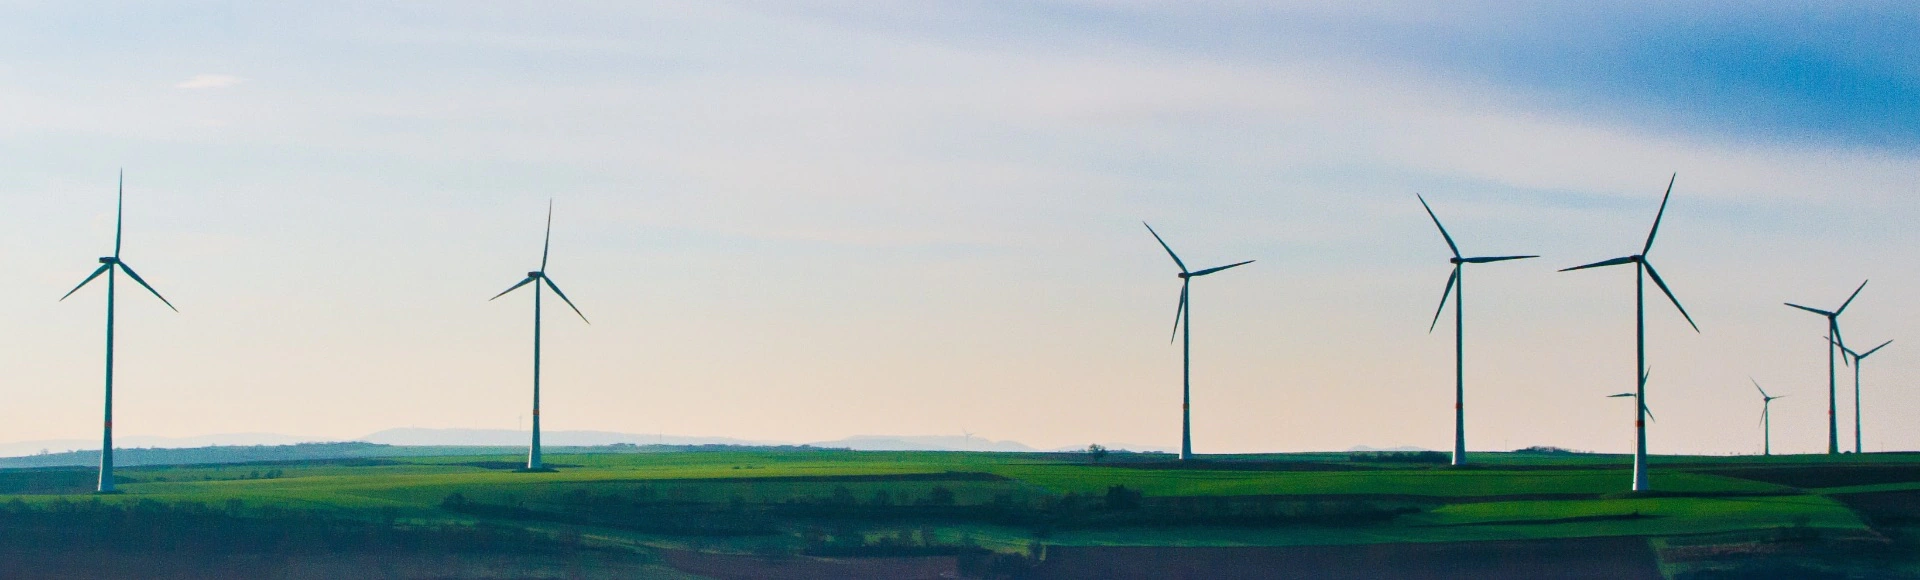 Windmills for sustainable power